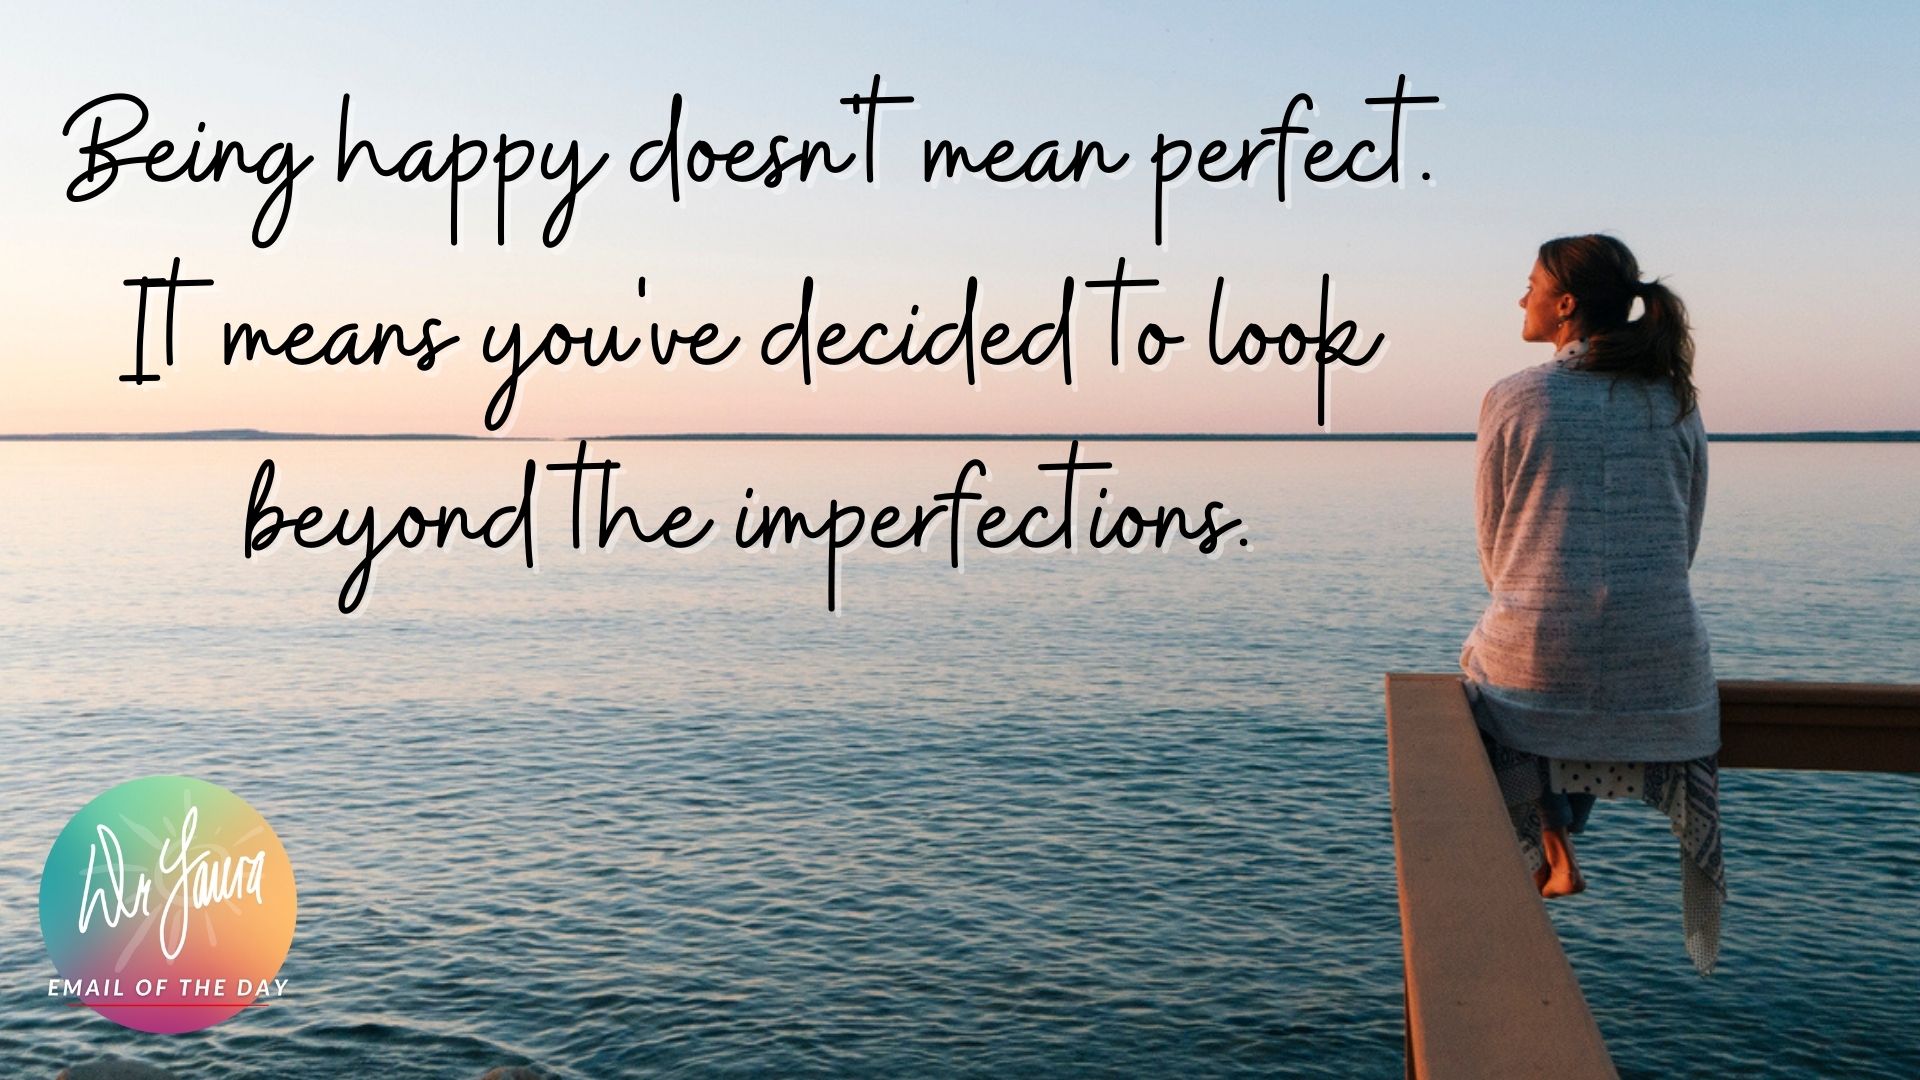 Email of the Day: I’m Happier Since I Stopped Being a Perfectionist